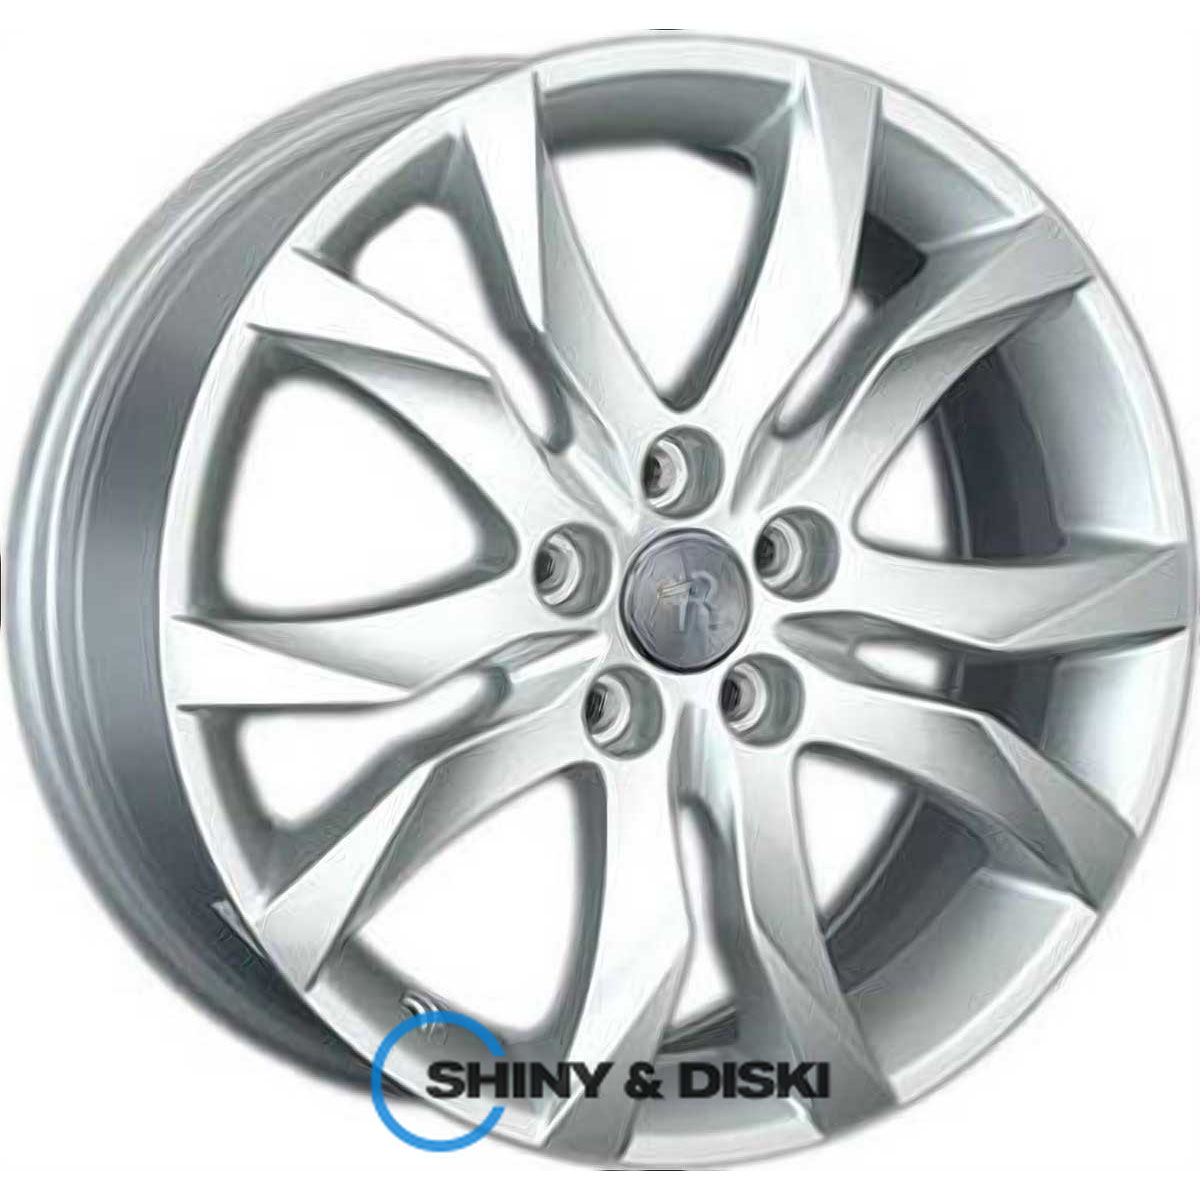 replay ford fd63 s r17 w7 pcd5x108 et50 dia63.3